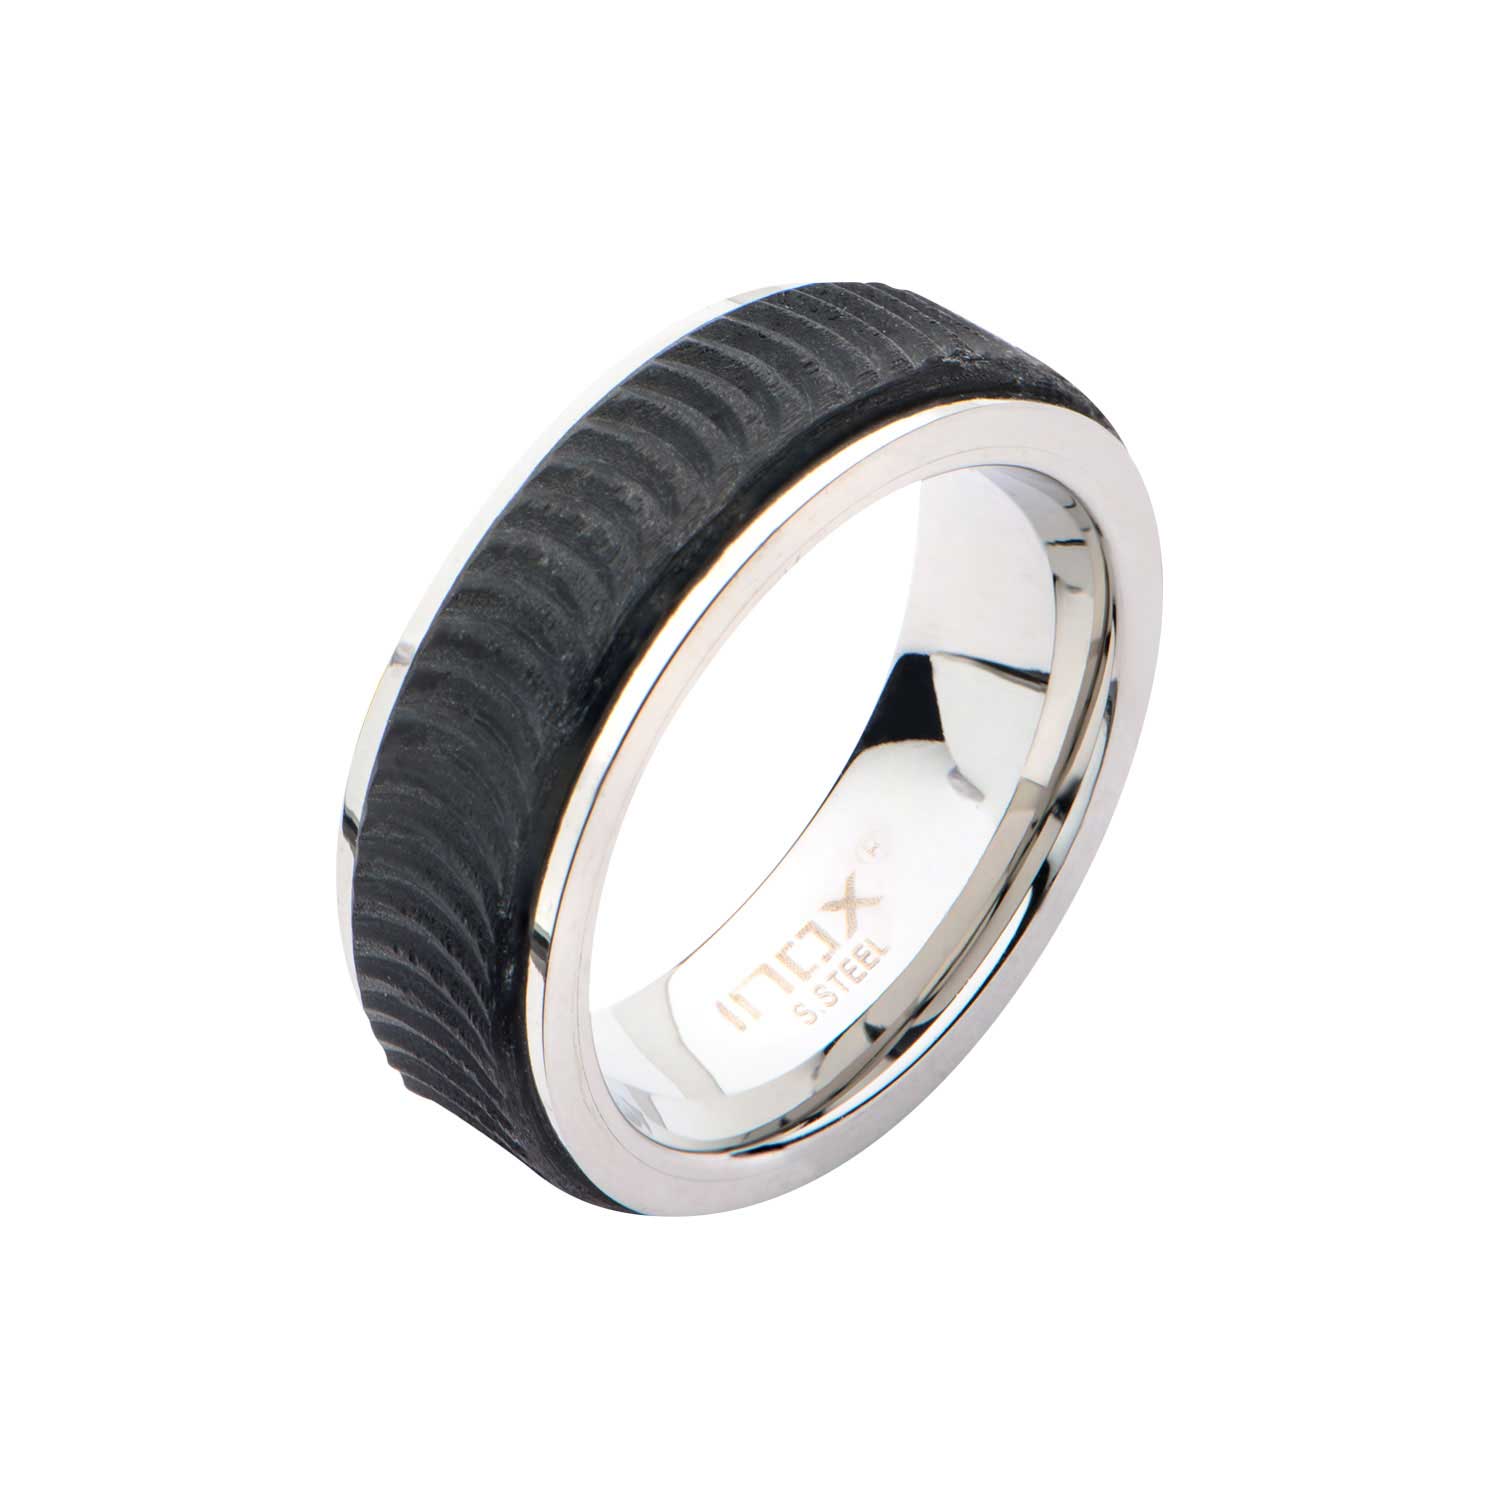 Center Solid Carbon Fiber Ridged Ring Image 2 Enchanted Jewelry Plainfield, CT